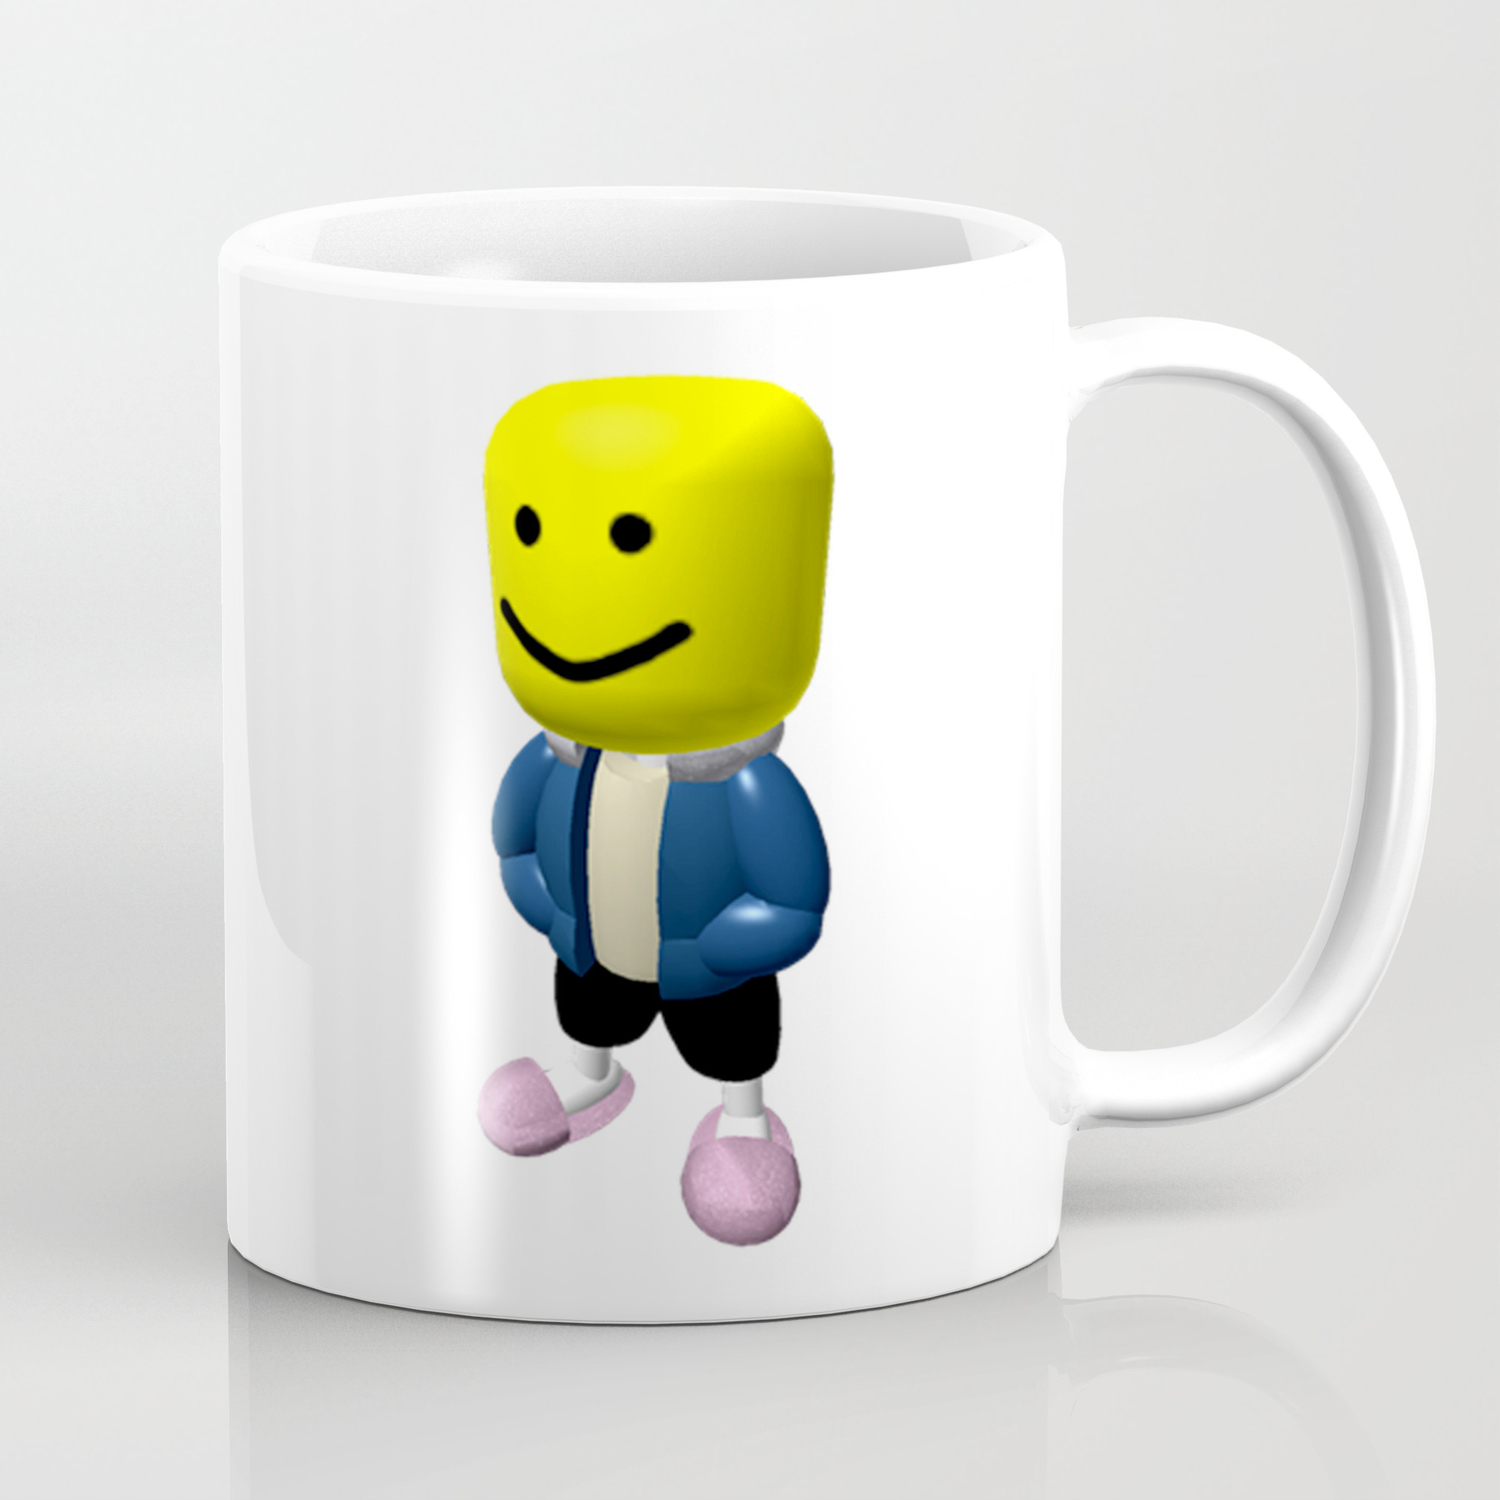 Roblox Mug Robux Hack Without Verification - how to get roblox plus on firefox robux emoji